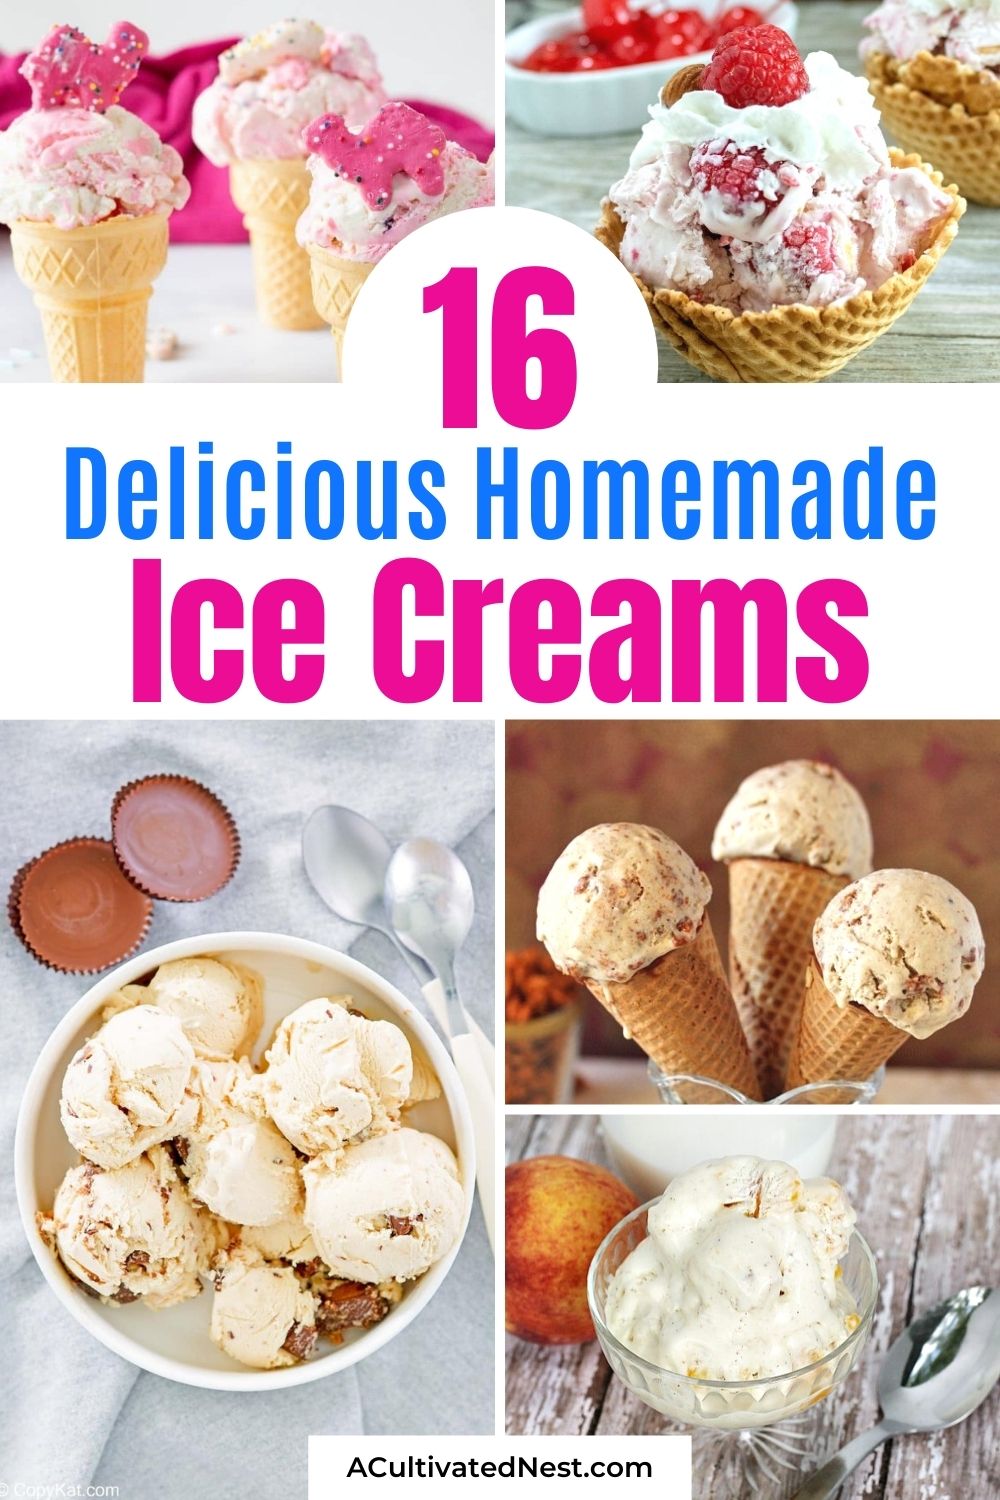 16 Mouth-Watering Homemade Ice Cream Recipes- If you want a delicious cold treat this summer, then you have to make some ice cream! Here are some delicious homemade ice cream recipes for you to try, many of which don't require an ice cream maker! | #iceCreamRecipes #dessertIdeas #homemadeIceCream #dessertRecipes #ACultivatedNest